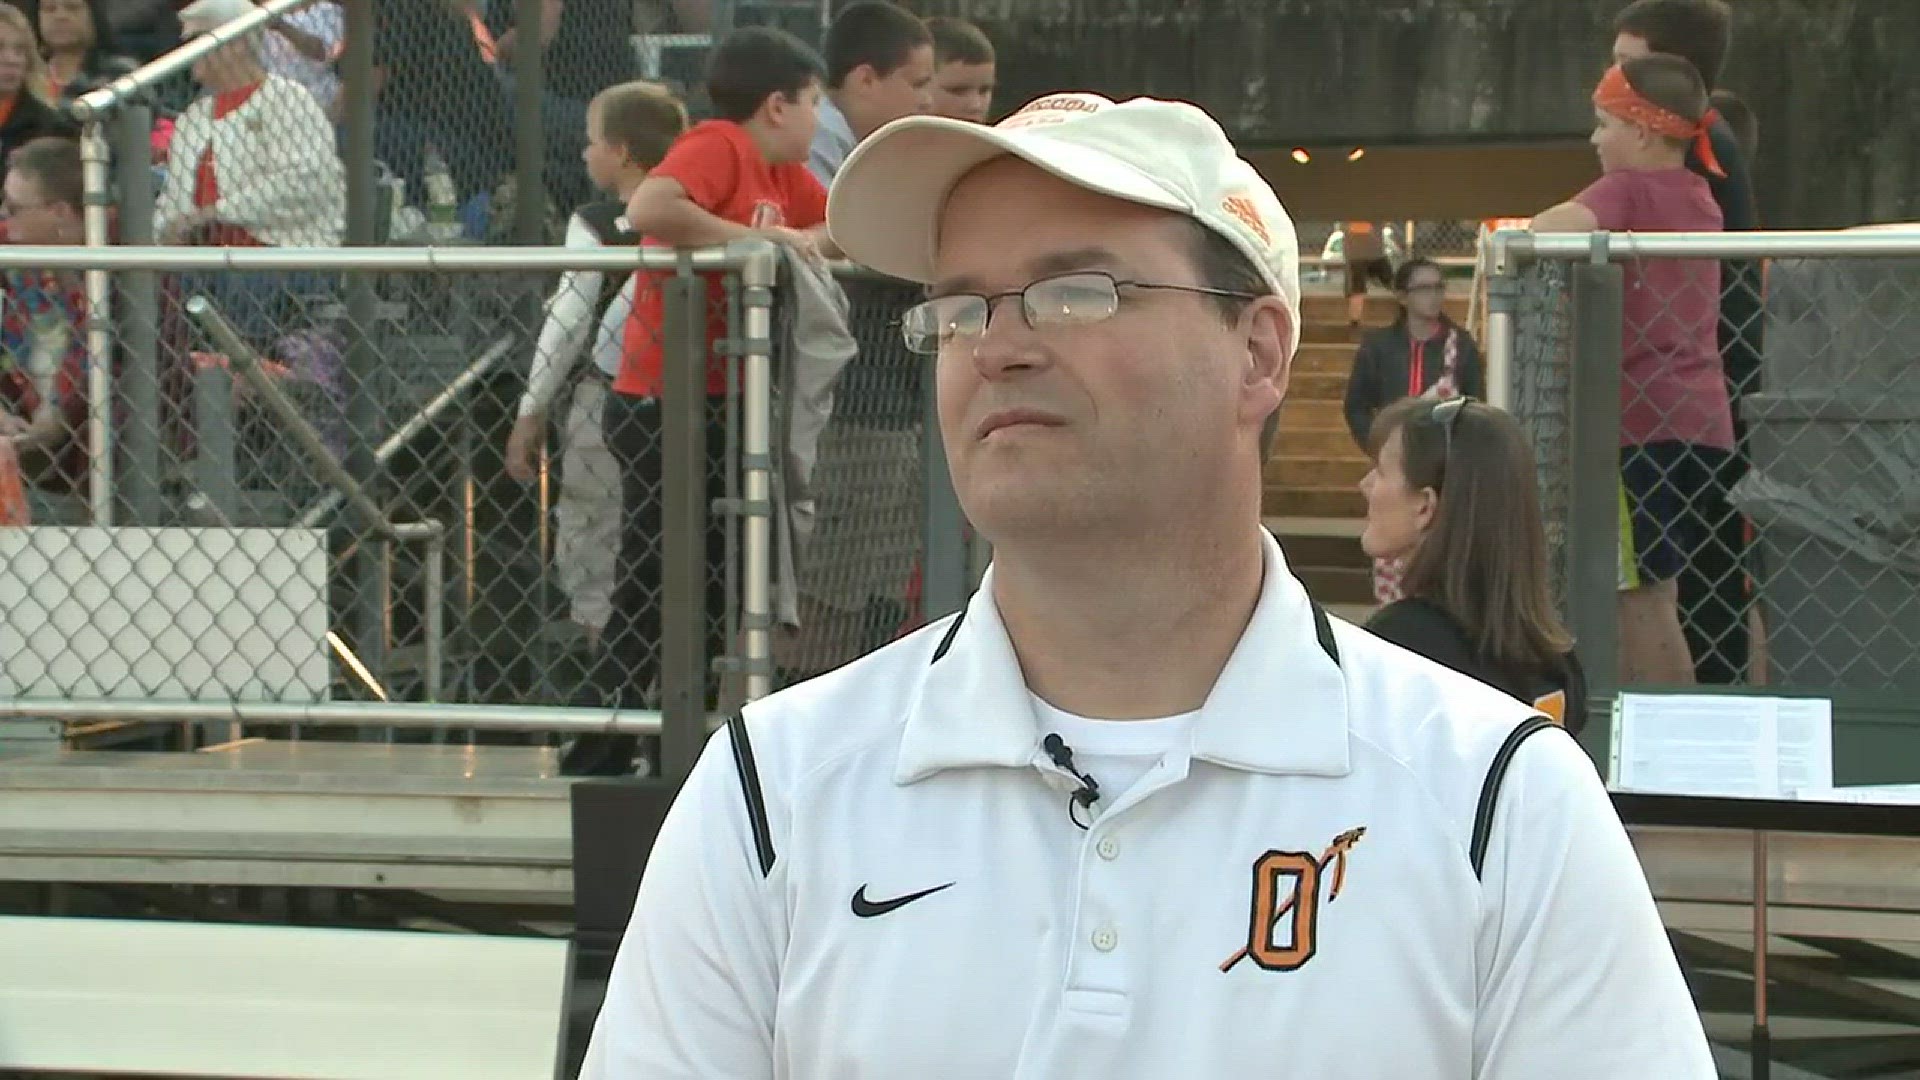 Richard May talks about his late father, Jim May, during the dedication of Oneida's football stadium.